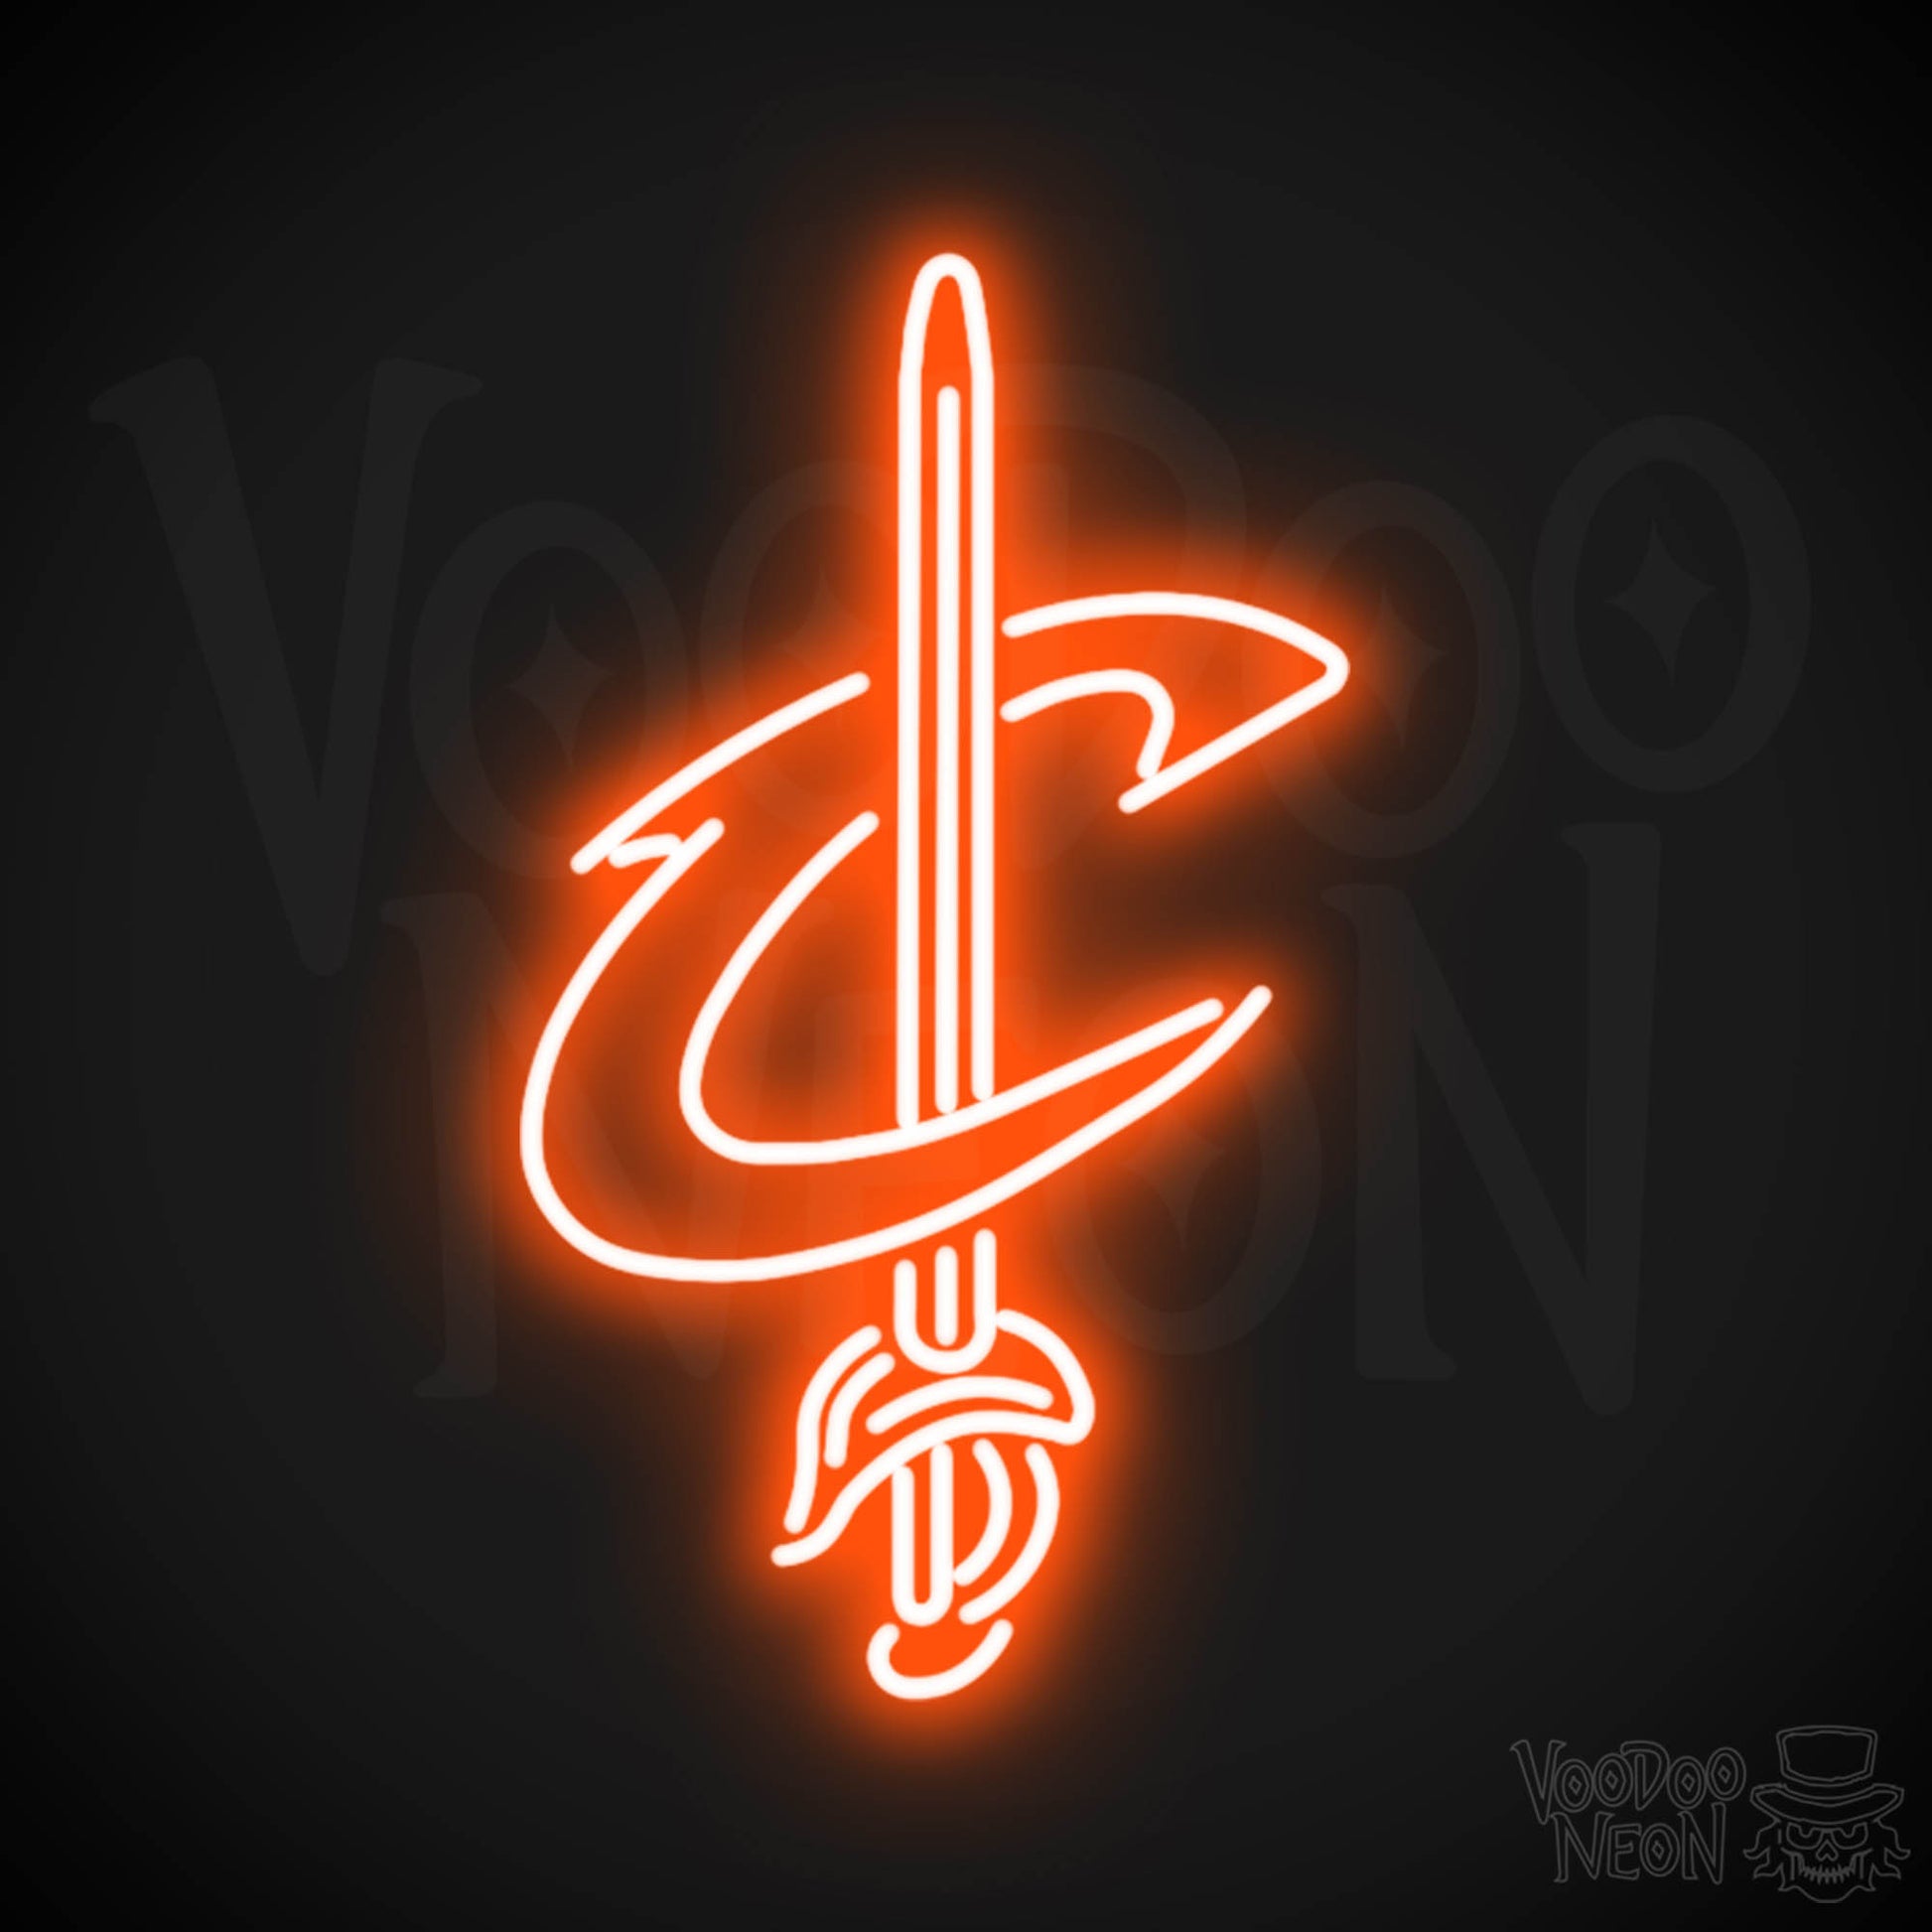 Cleveland Cavaliers Neon Sign - Cleveland Cavaliers Sign - Neon Cavaliers Wall Art - Color Orange